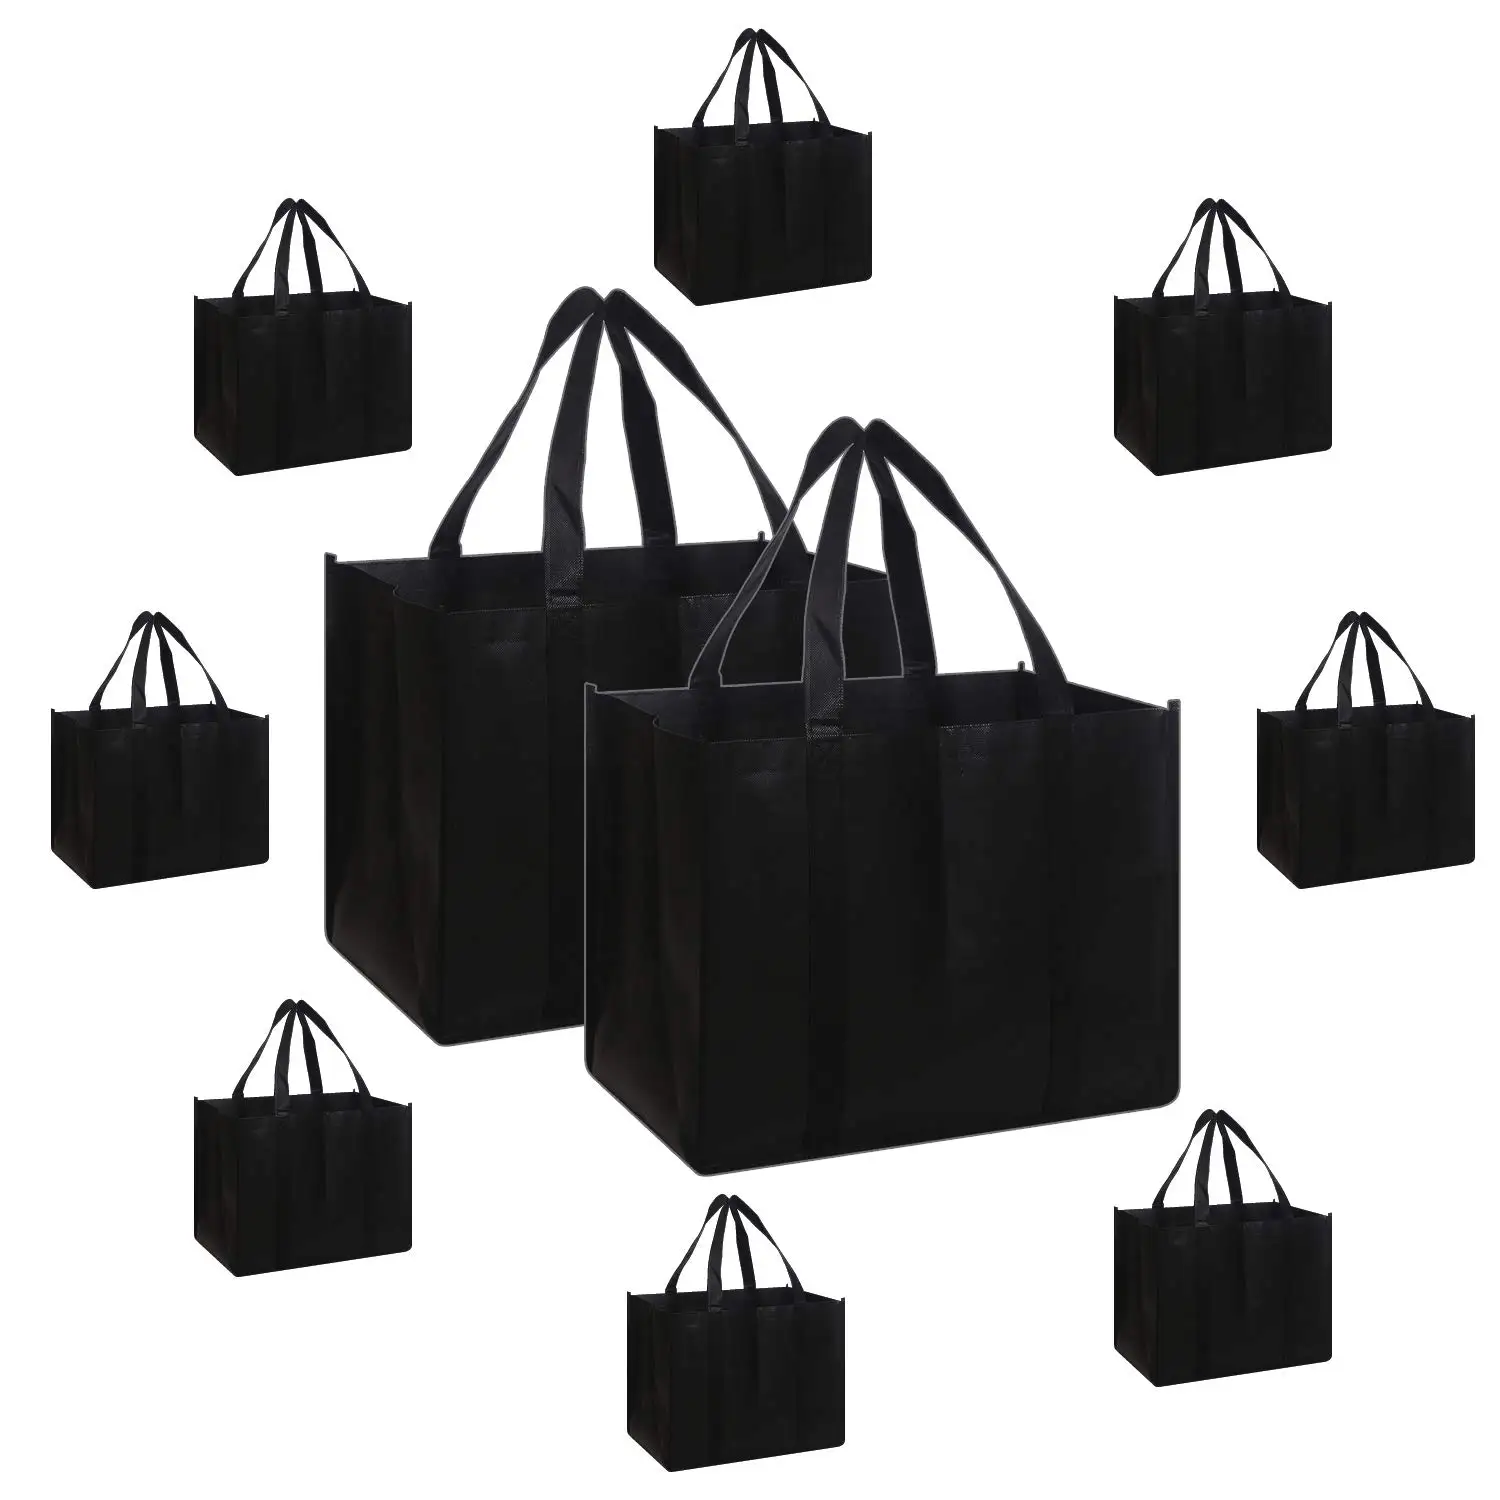 Set Of 10 Reusable Grocery Bags Black Shopping Tote Bags With ...